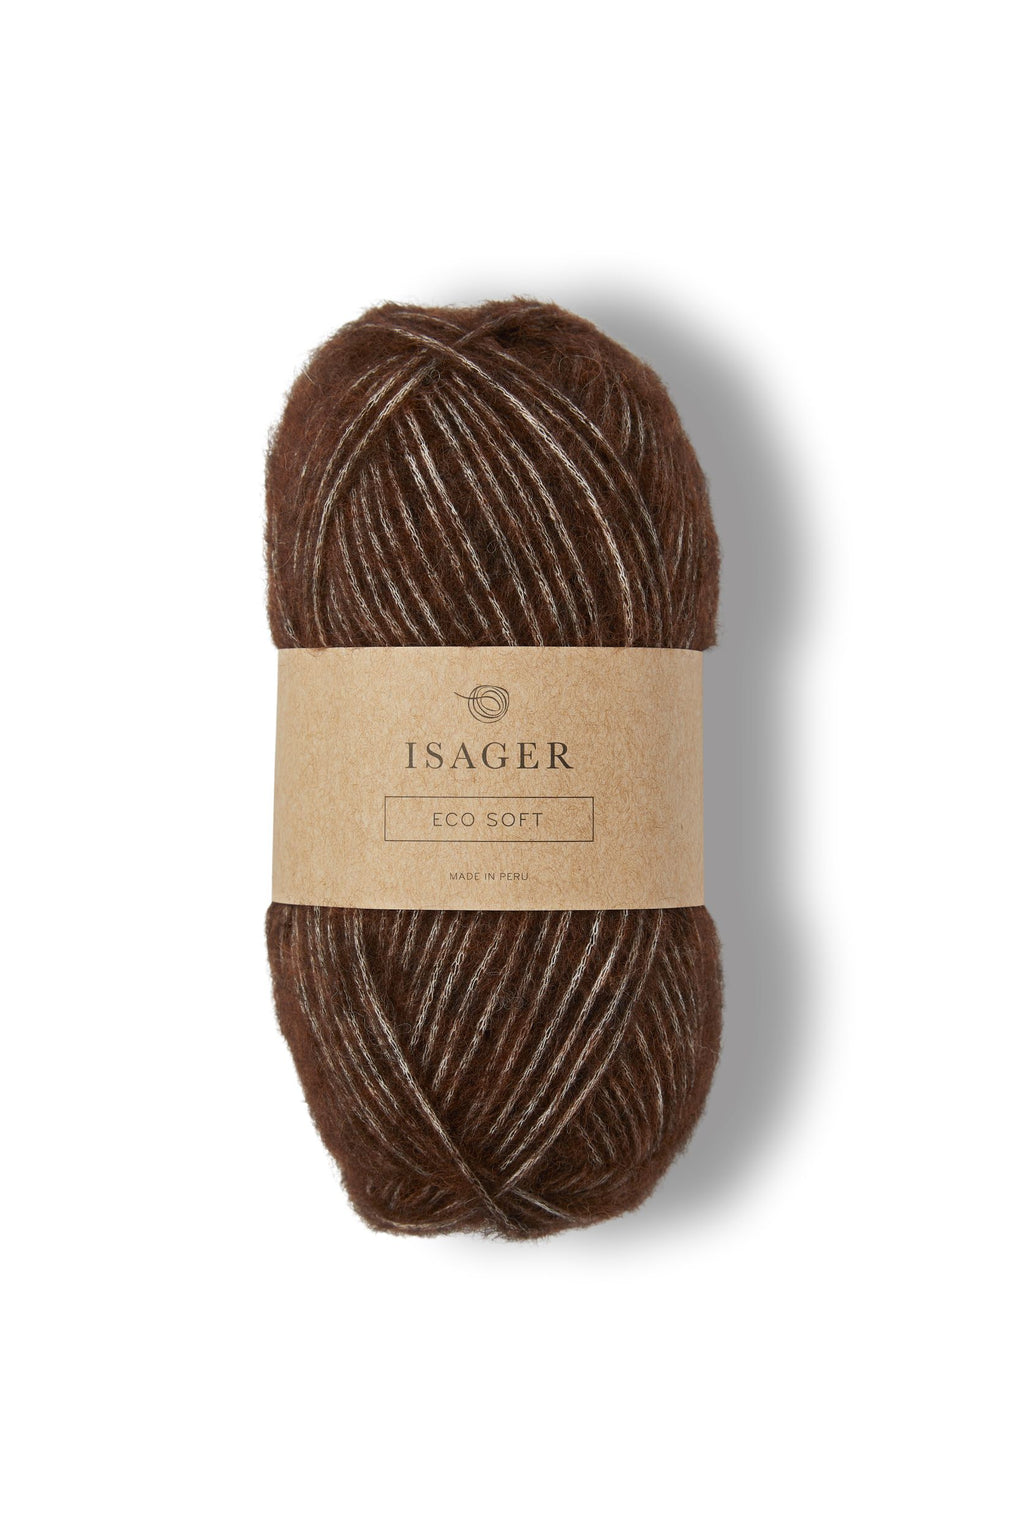 Isager ECO Soft 8s